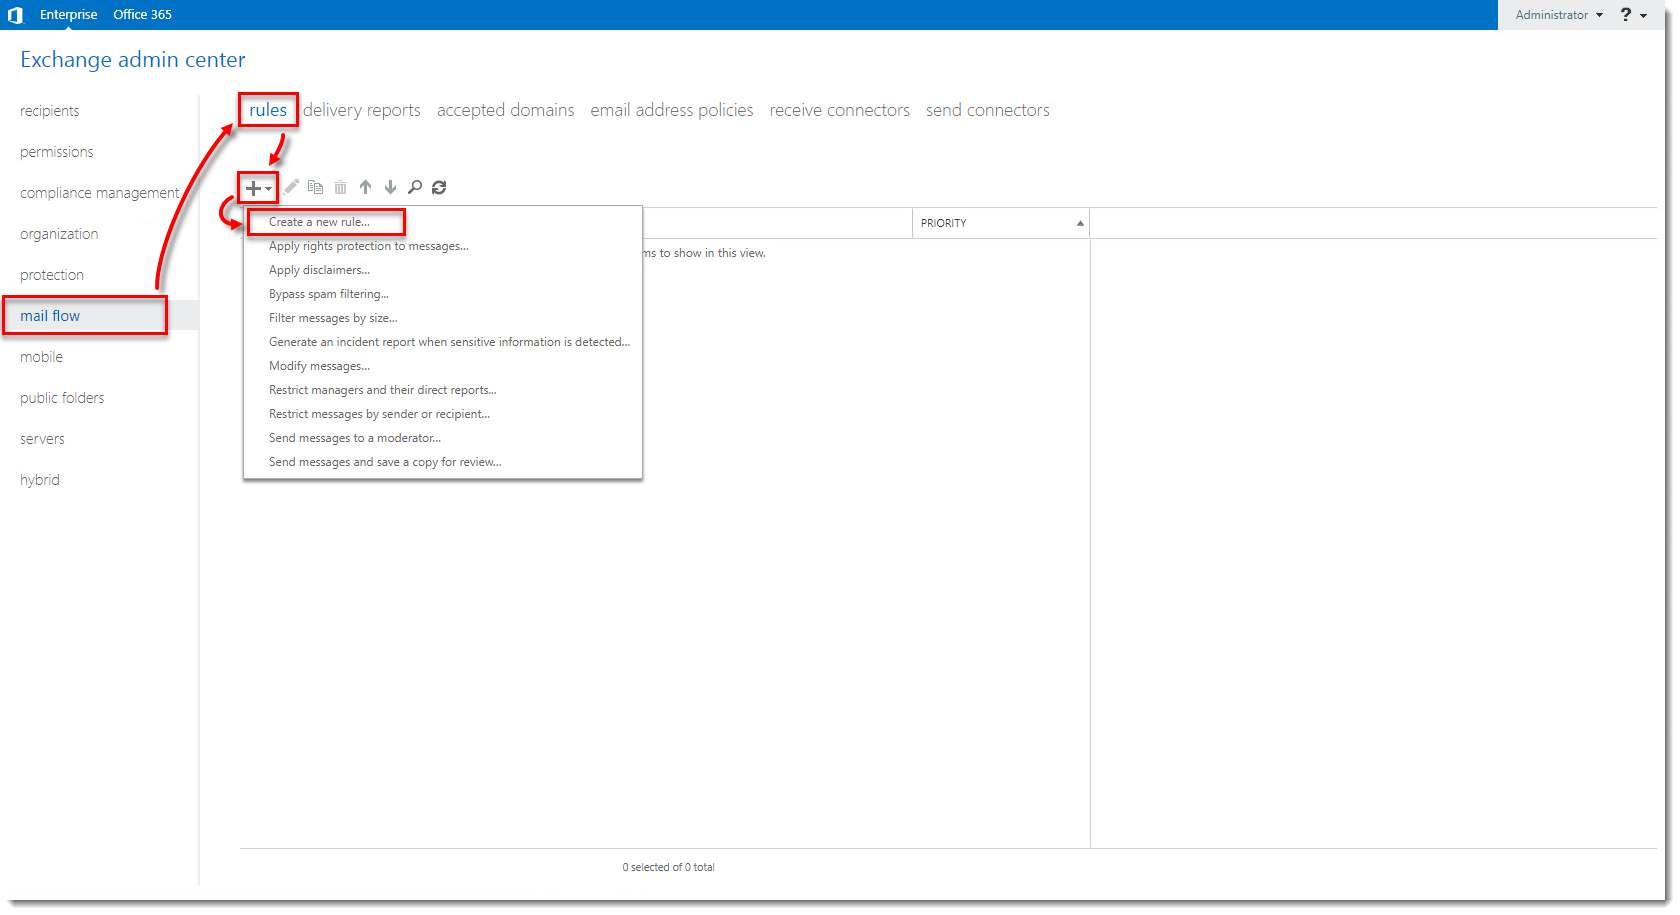 The Problem with Microsoft Flow for Exchange Admins